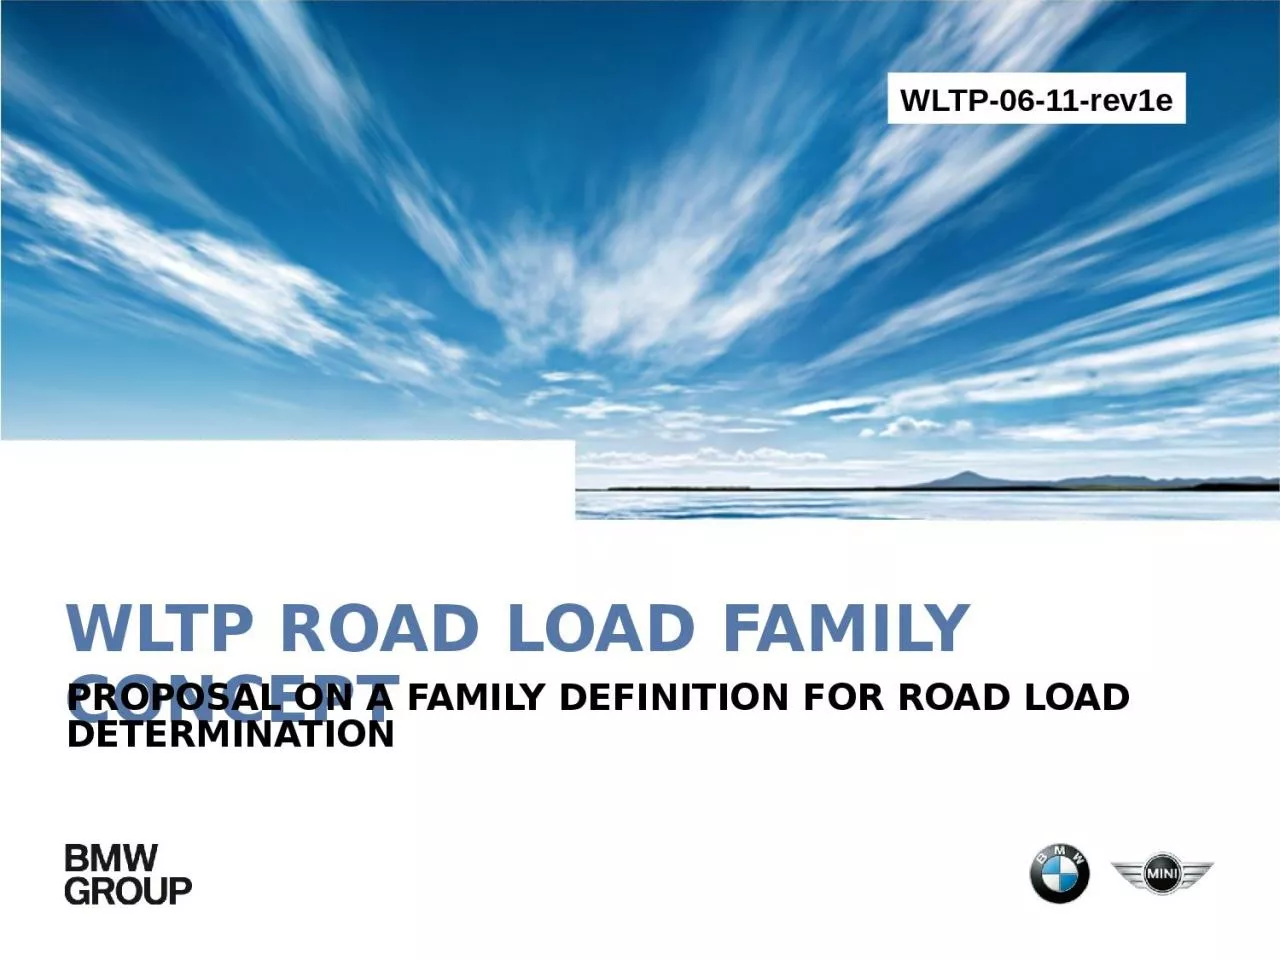 WLTP Road Load Family concept